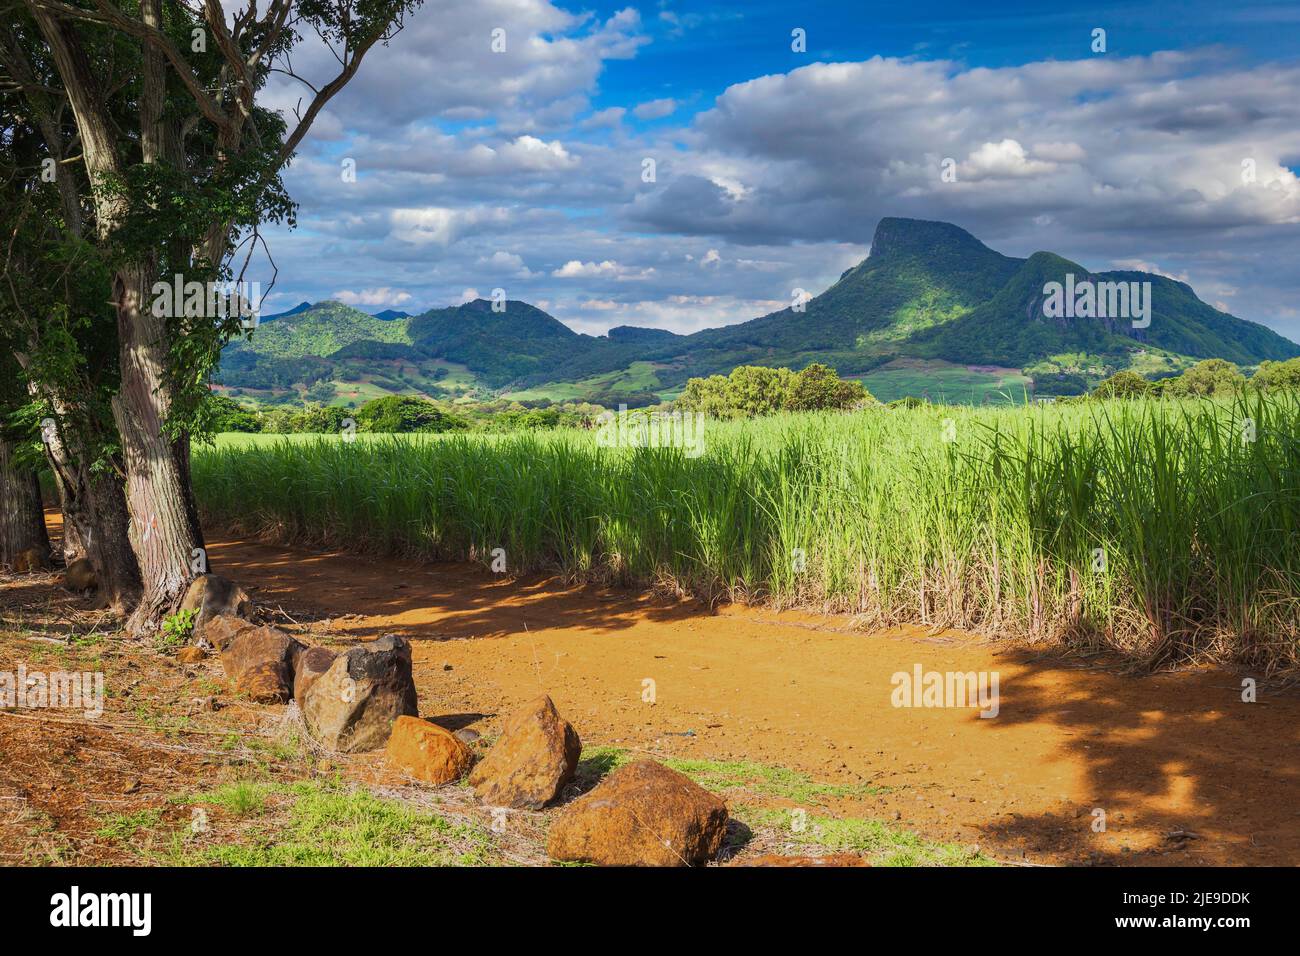 Lion mountain with green sugar cane field foreground on the beautiful tropical paradise island, Mauritius Stock Photo